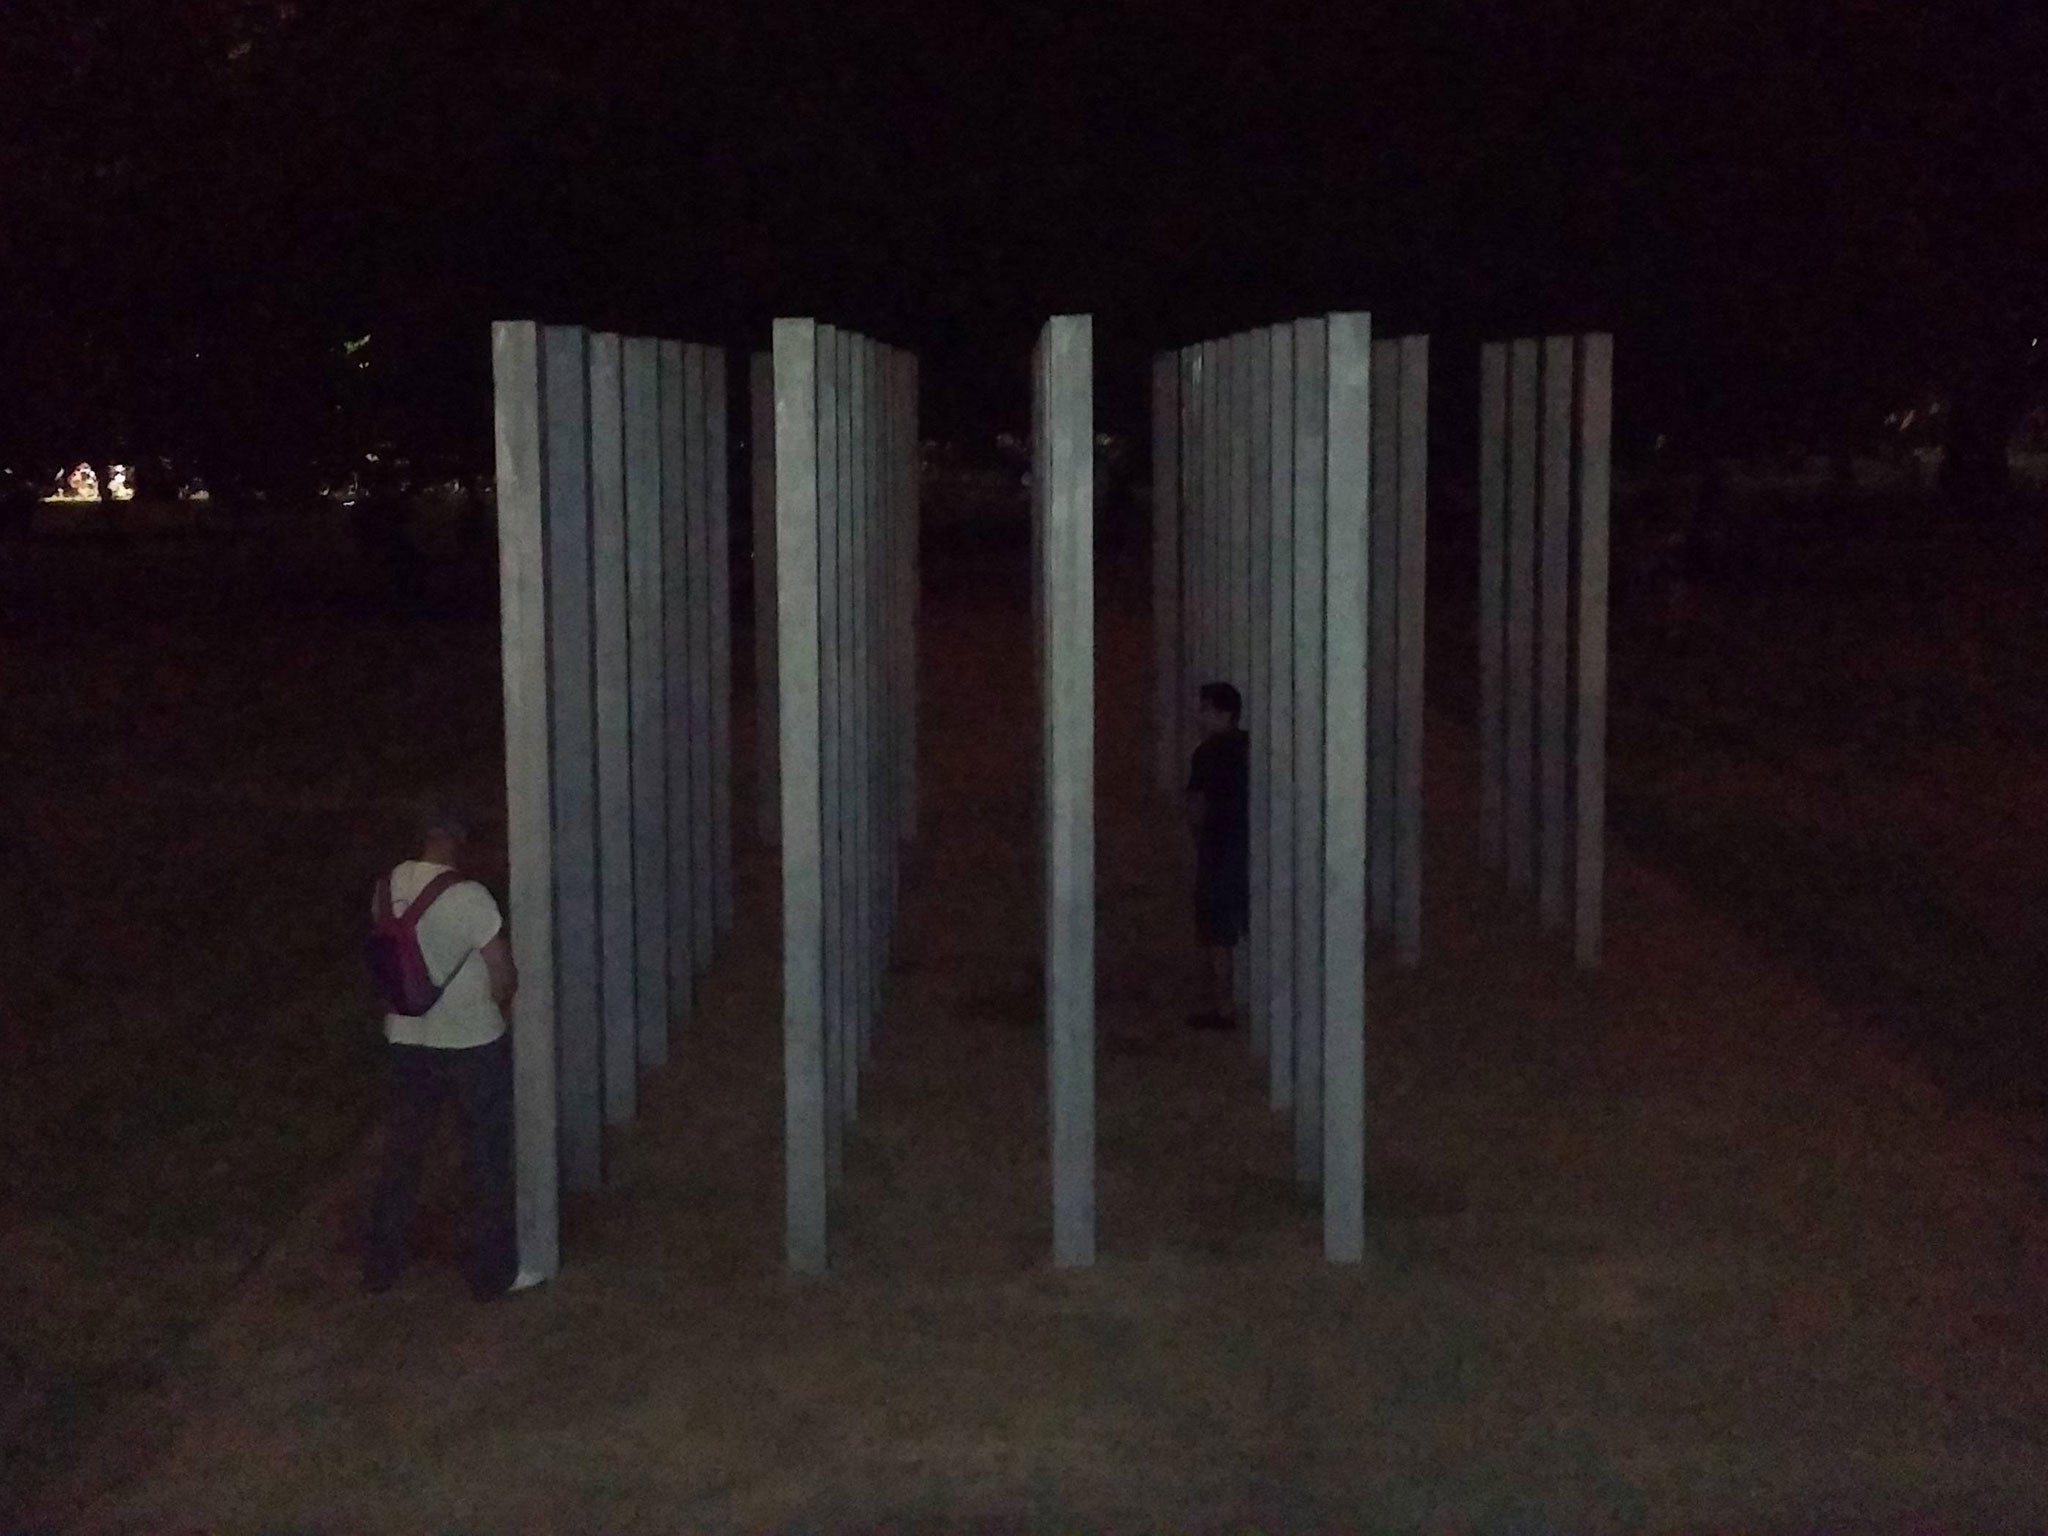 A picture appearing to show Barclaycard Summertime festivalgoers urinating on the 7/7 memorial in Hyde Park.